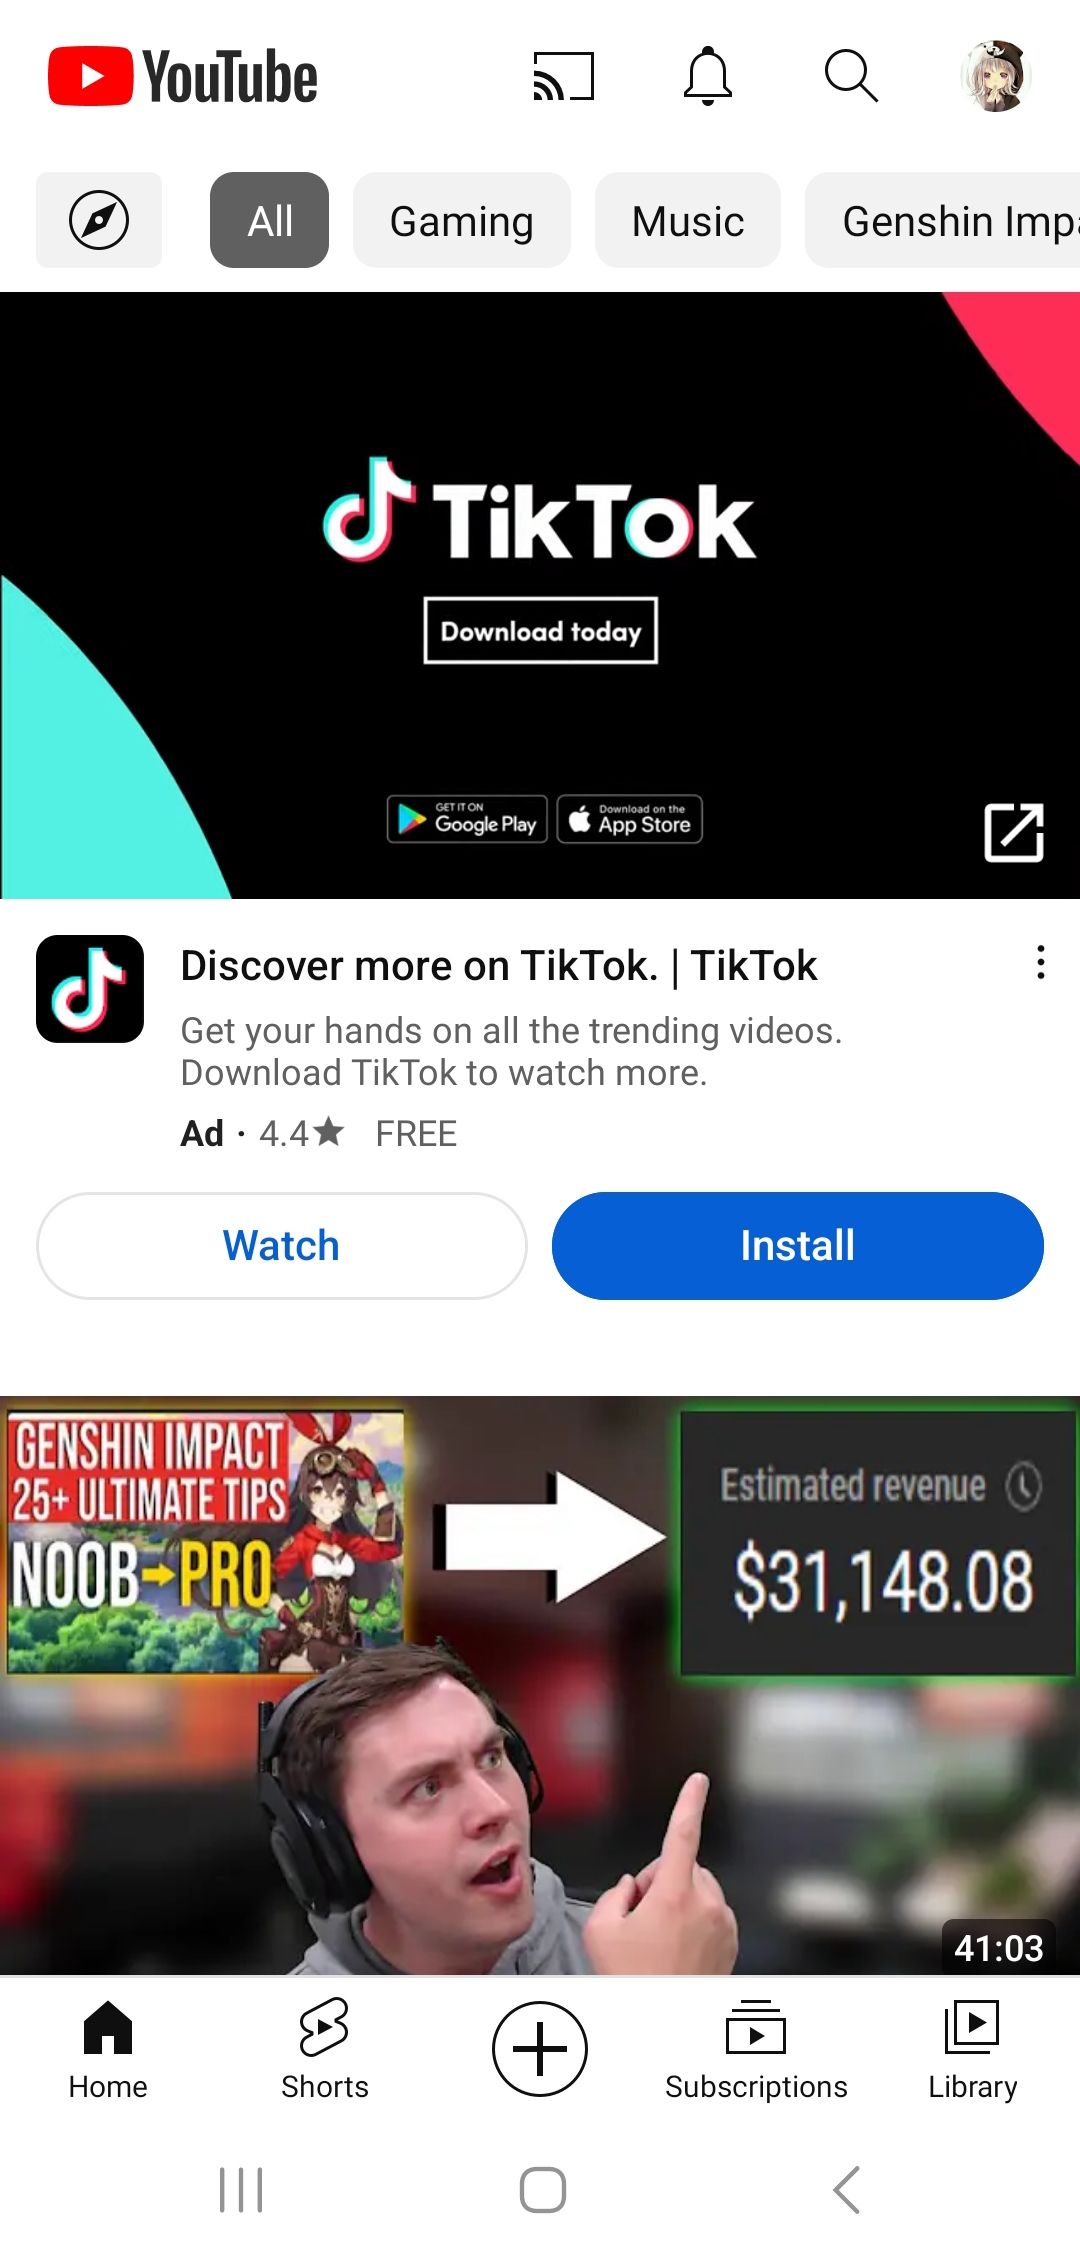 Preview of the YouTube app homepage on mobile